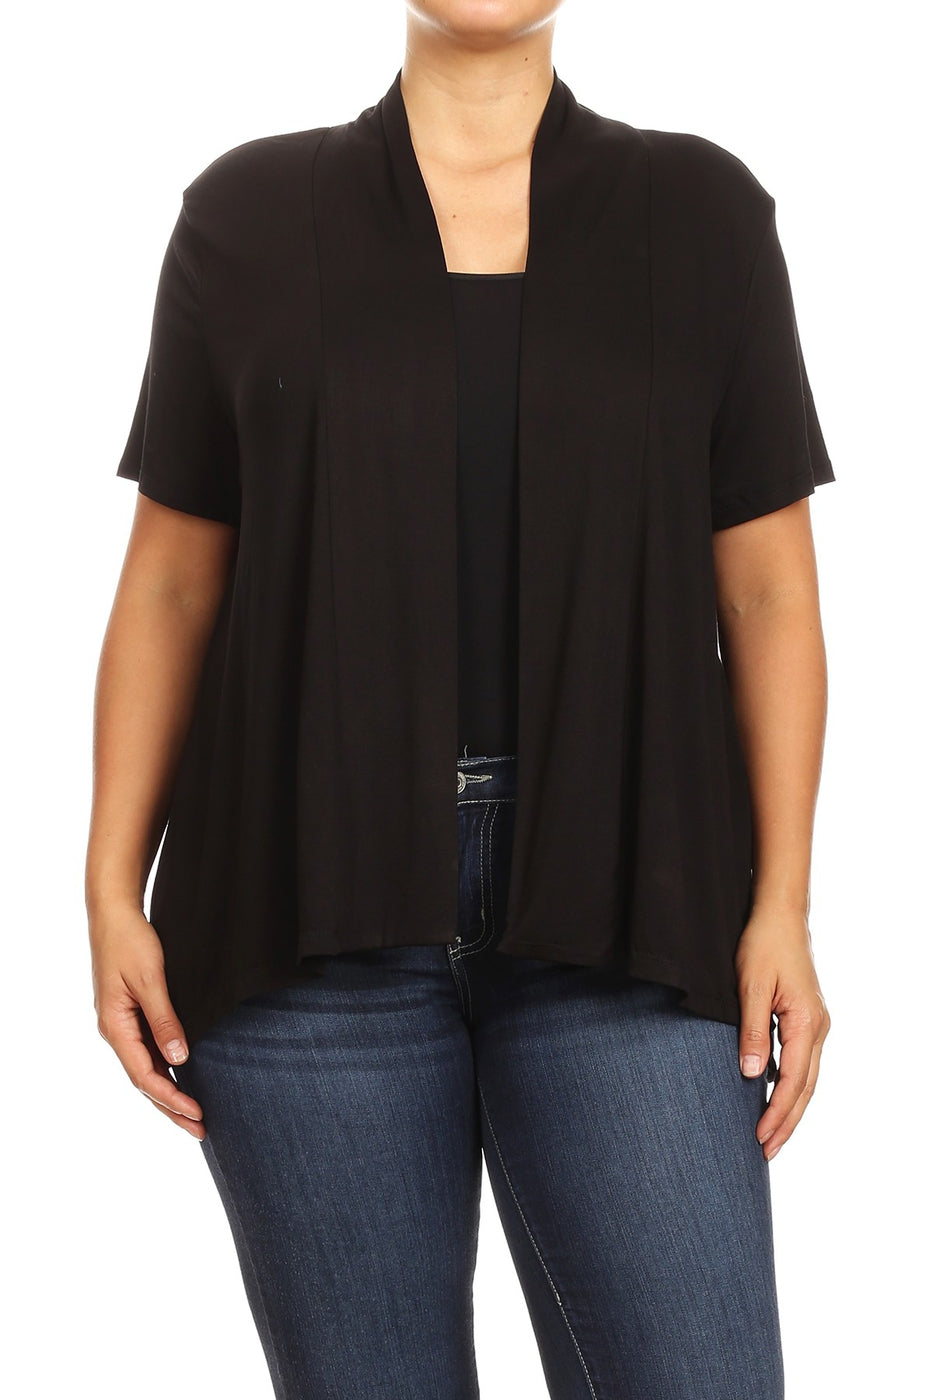 Cara Short Sleeve Open Front Cardigan | Stretchy Rayon Spandex Blend Fabric | Regular Size & Plus Size | Sizes XS - 3XL